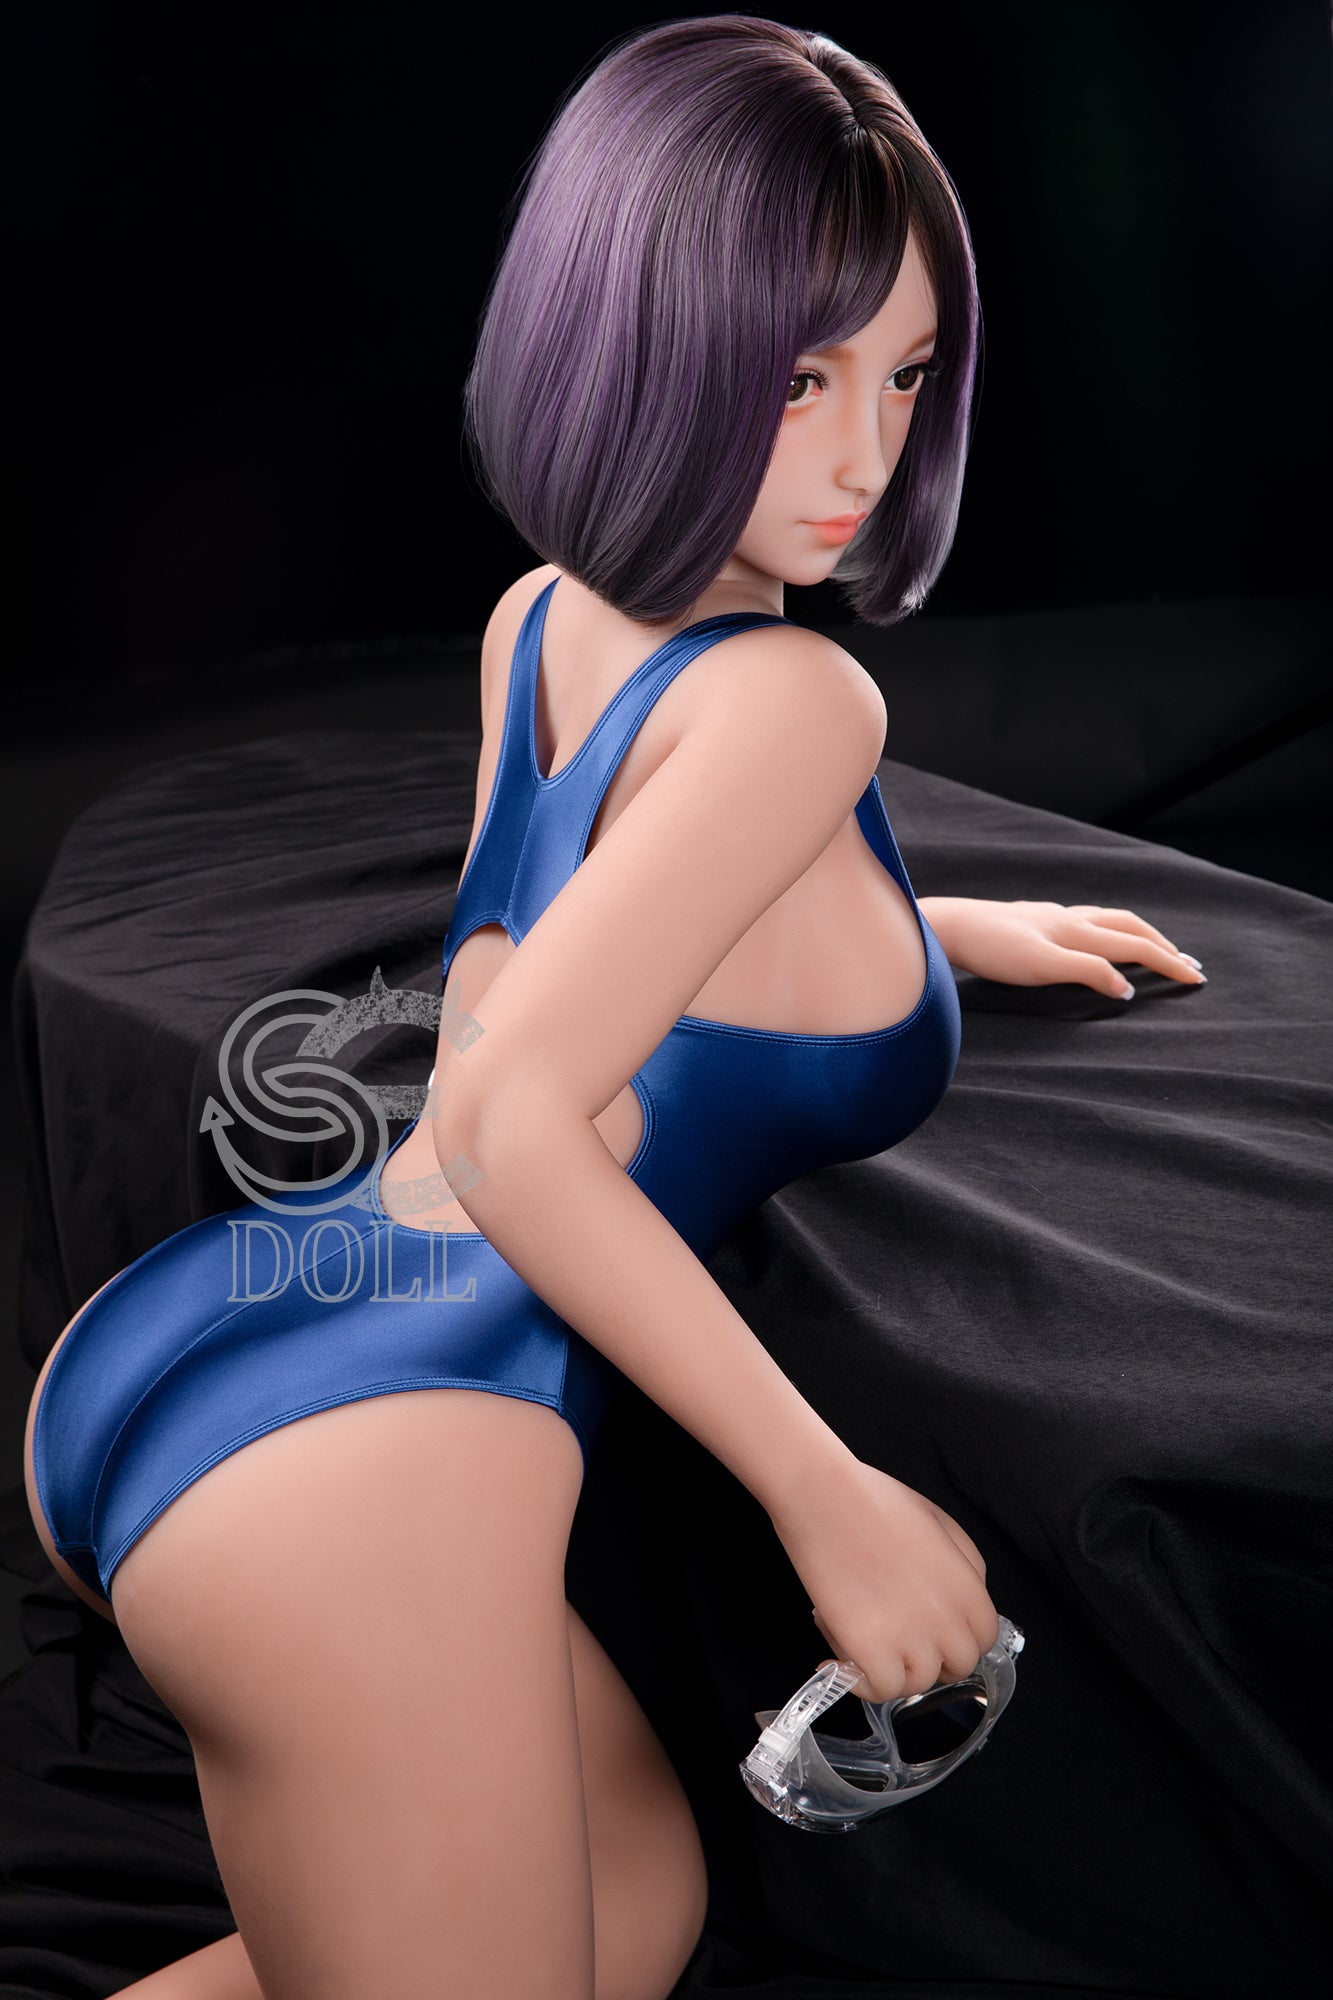 SEDOLL 161 cm F TPE - Miki | Buy Sex Dolls at DOLLS ACTUALLY